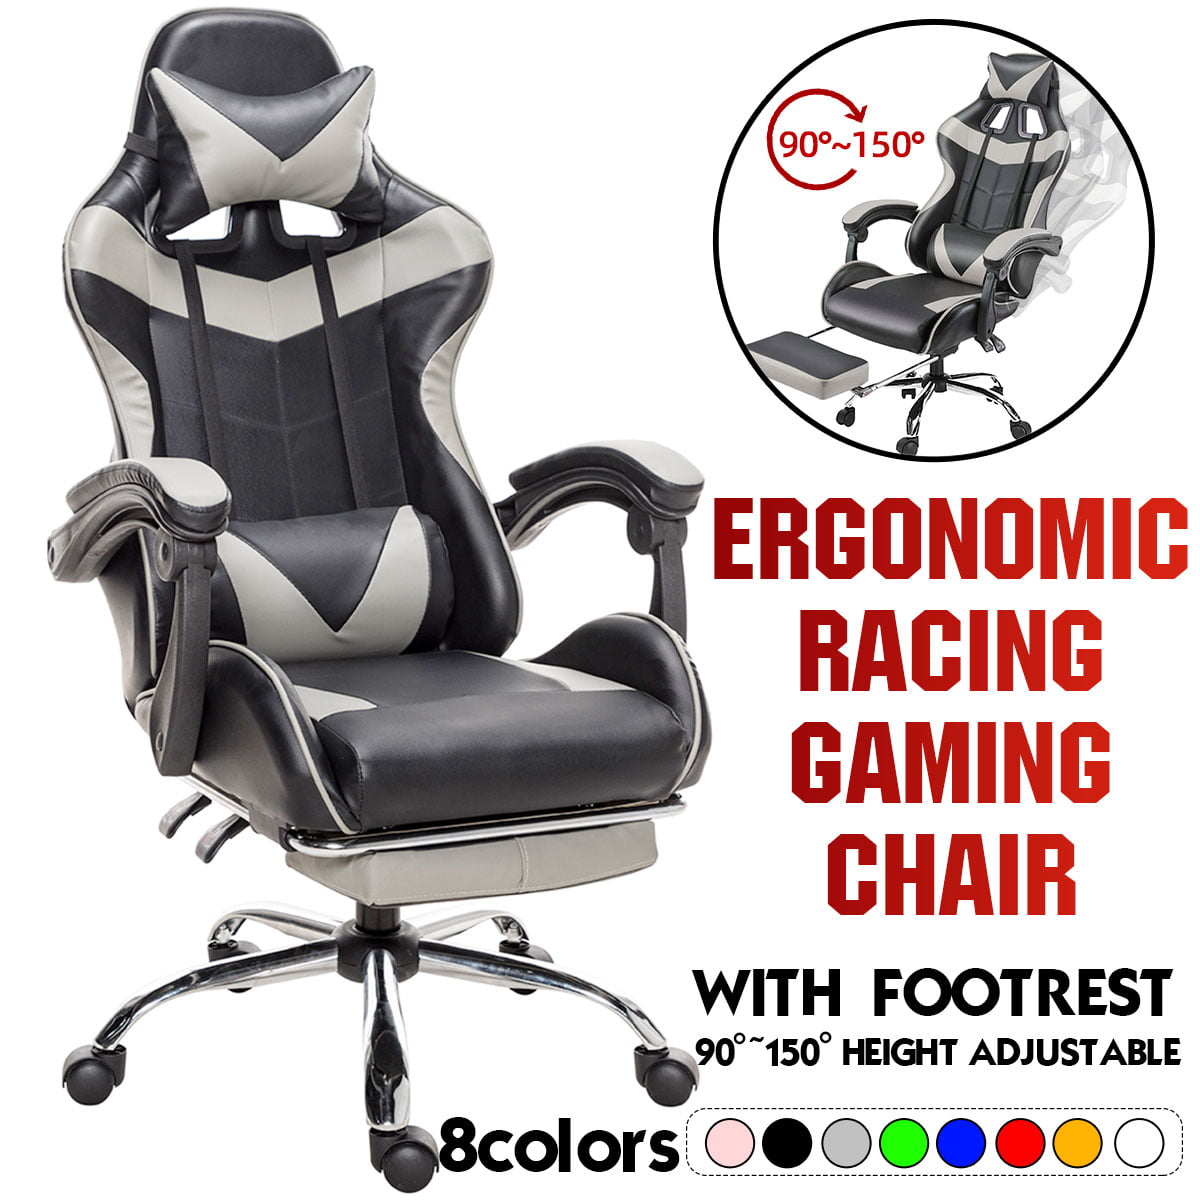 Details about   Ergonomic Gaming Chair High-Back Swivel Office Desk Lumbar Support Adjustable 